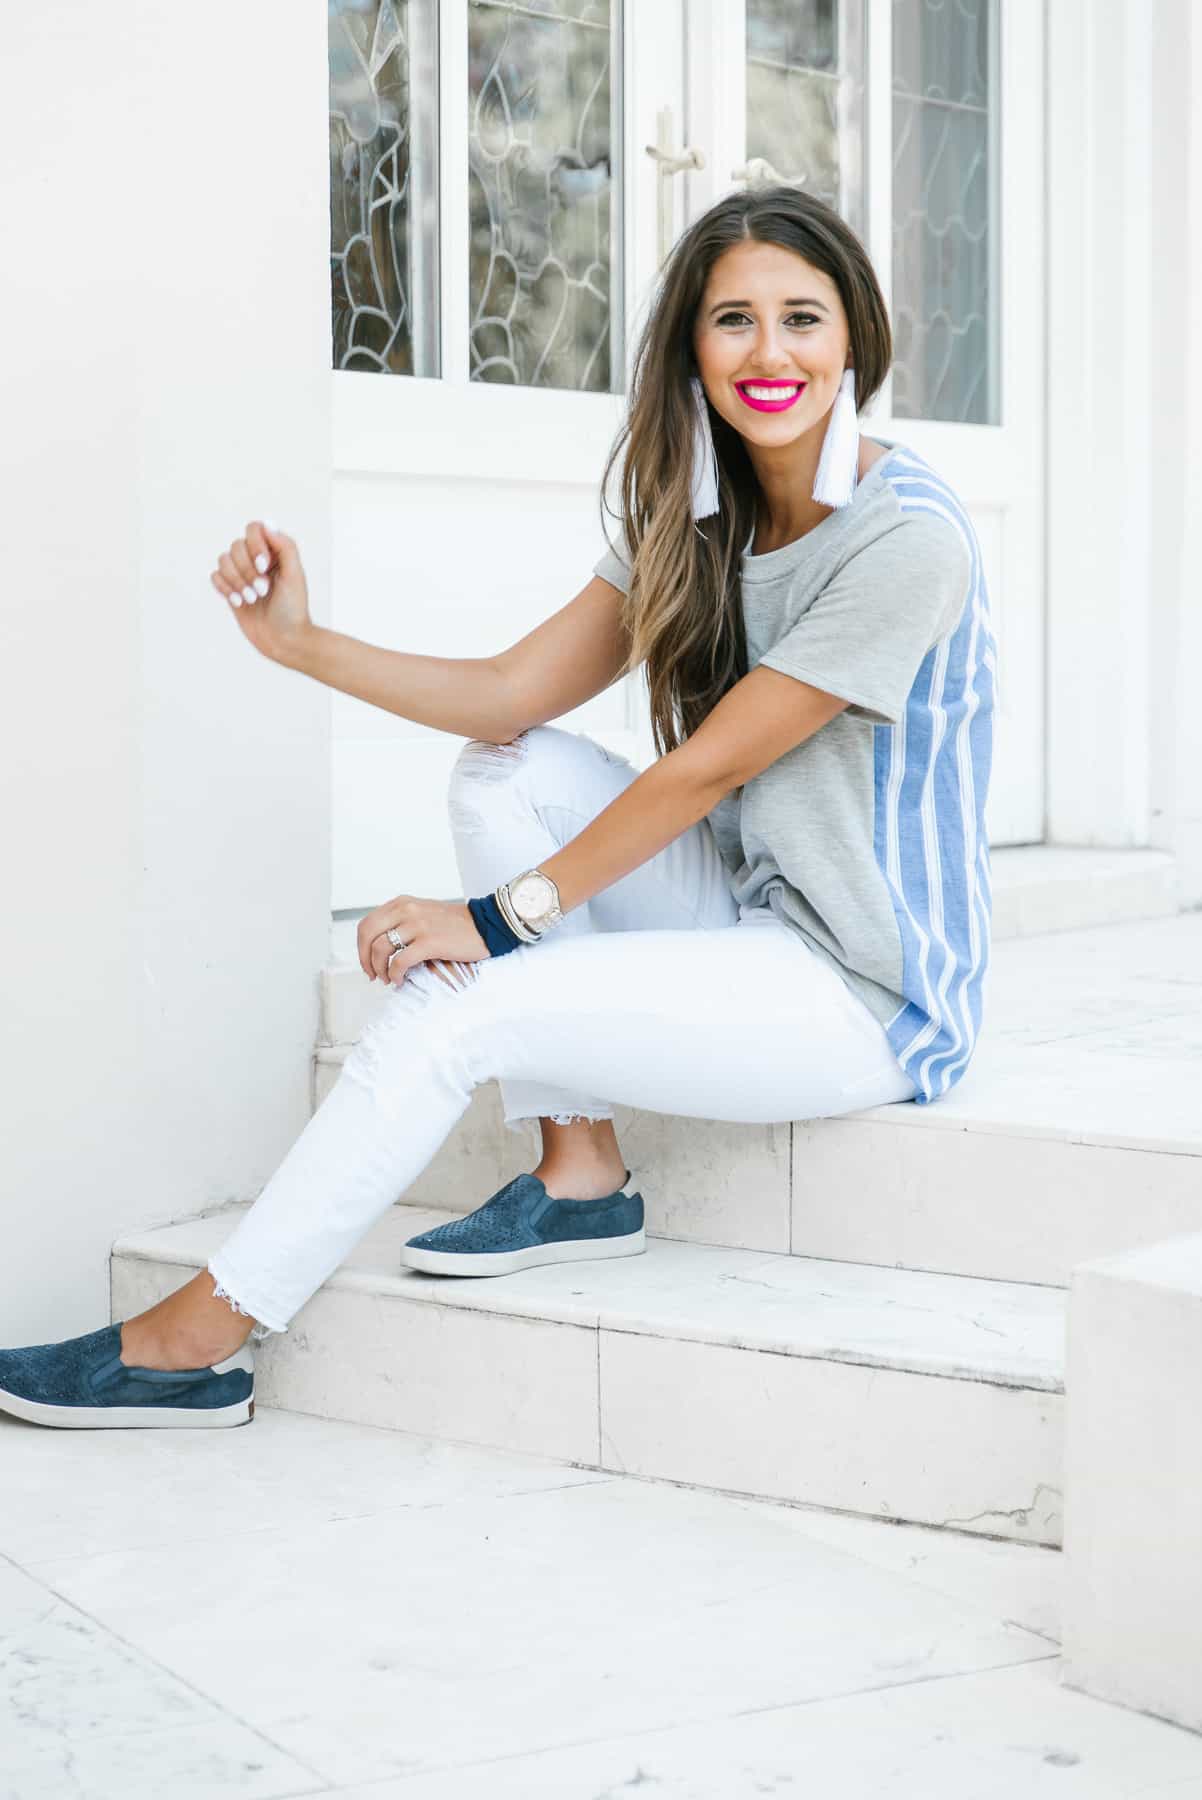 Dress Up Buttercup, Dede Raad, Houston Blogger, Fashion Blogger, Basic tshirt, stripe back t-shirt, tassel earrings, casual outfit, white jeans